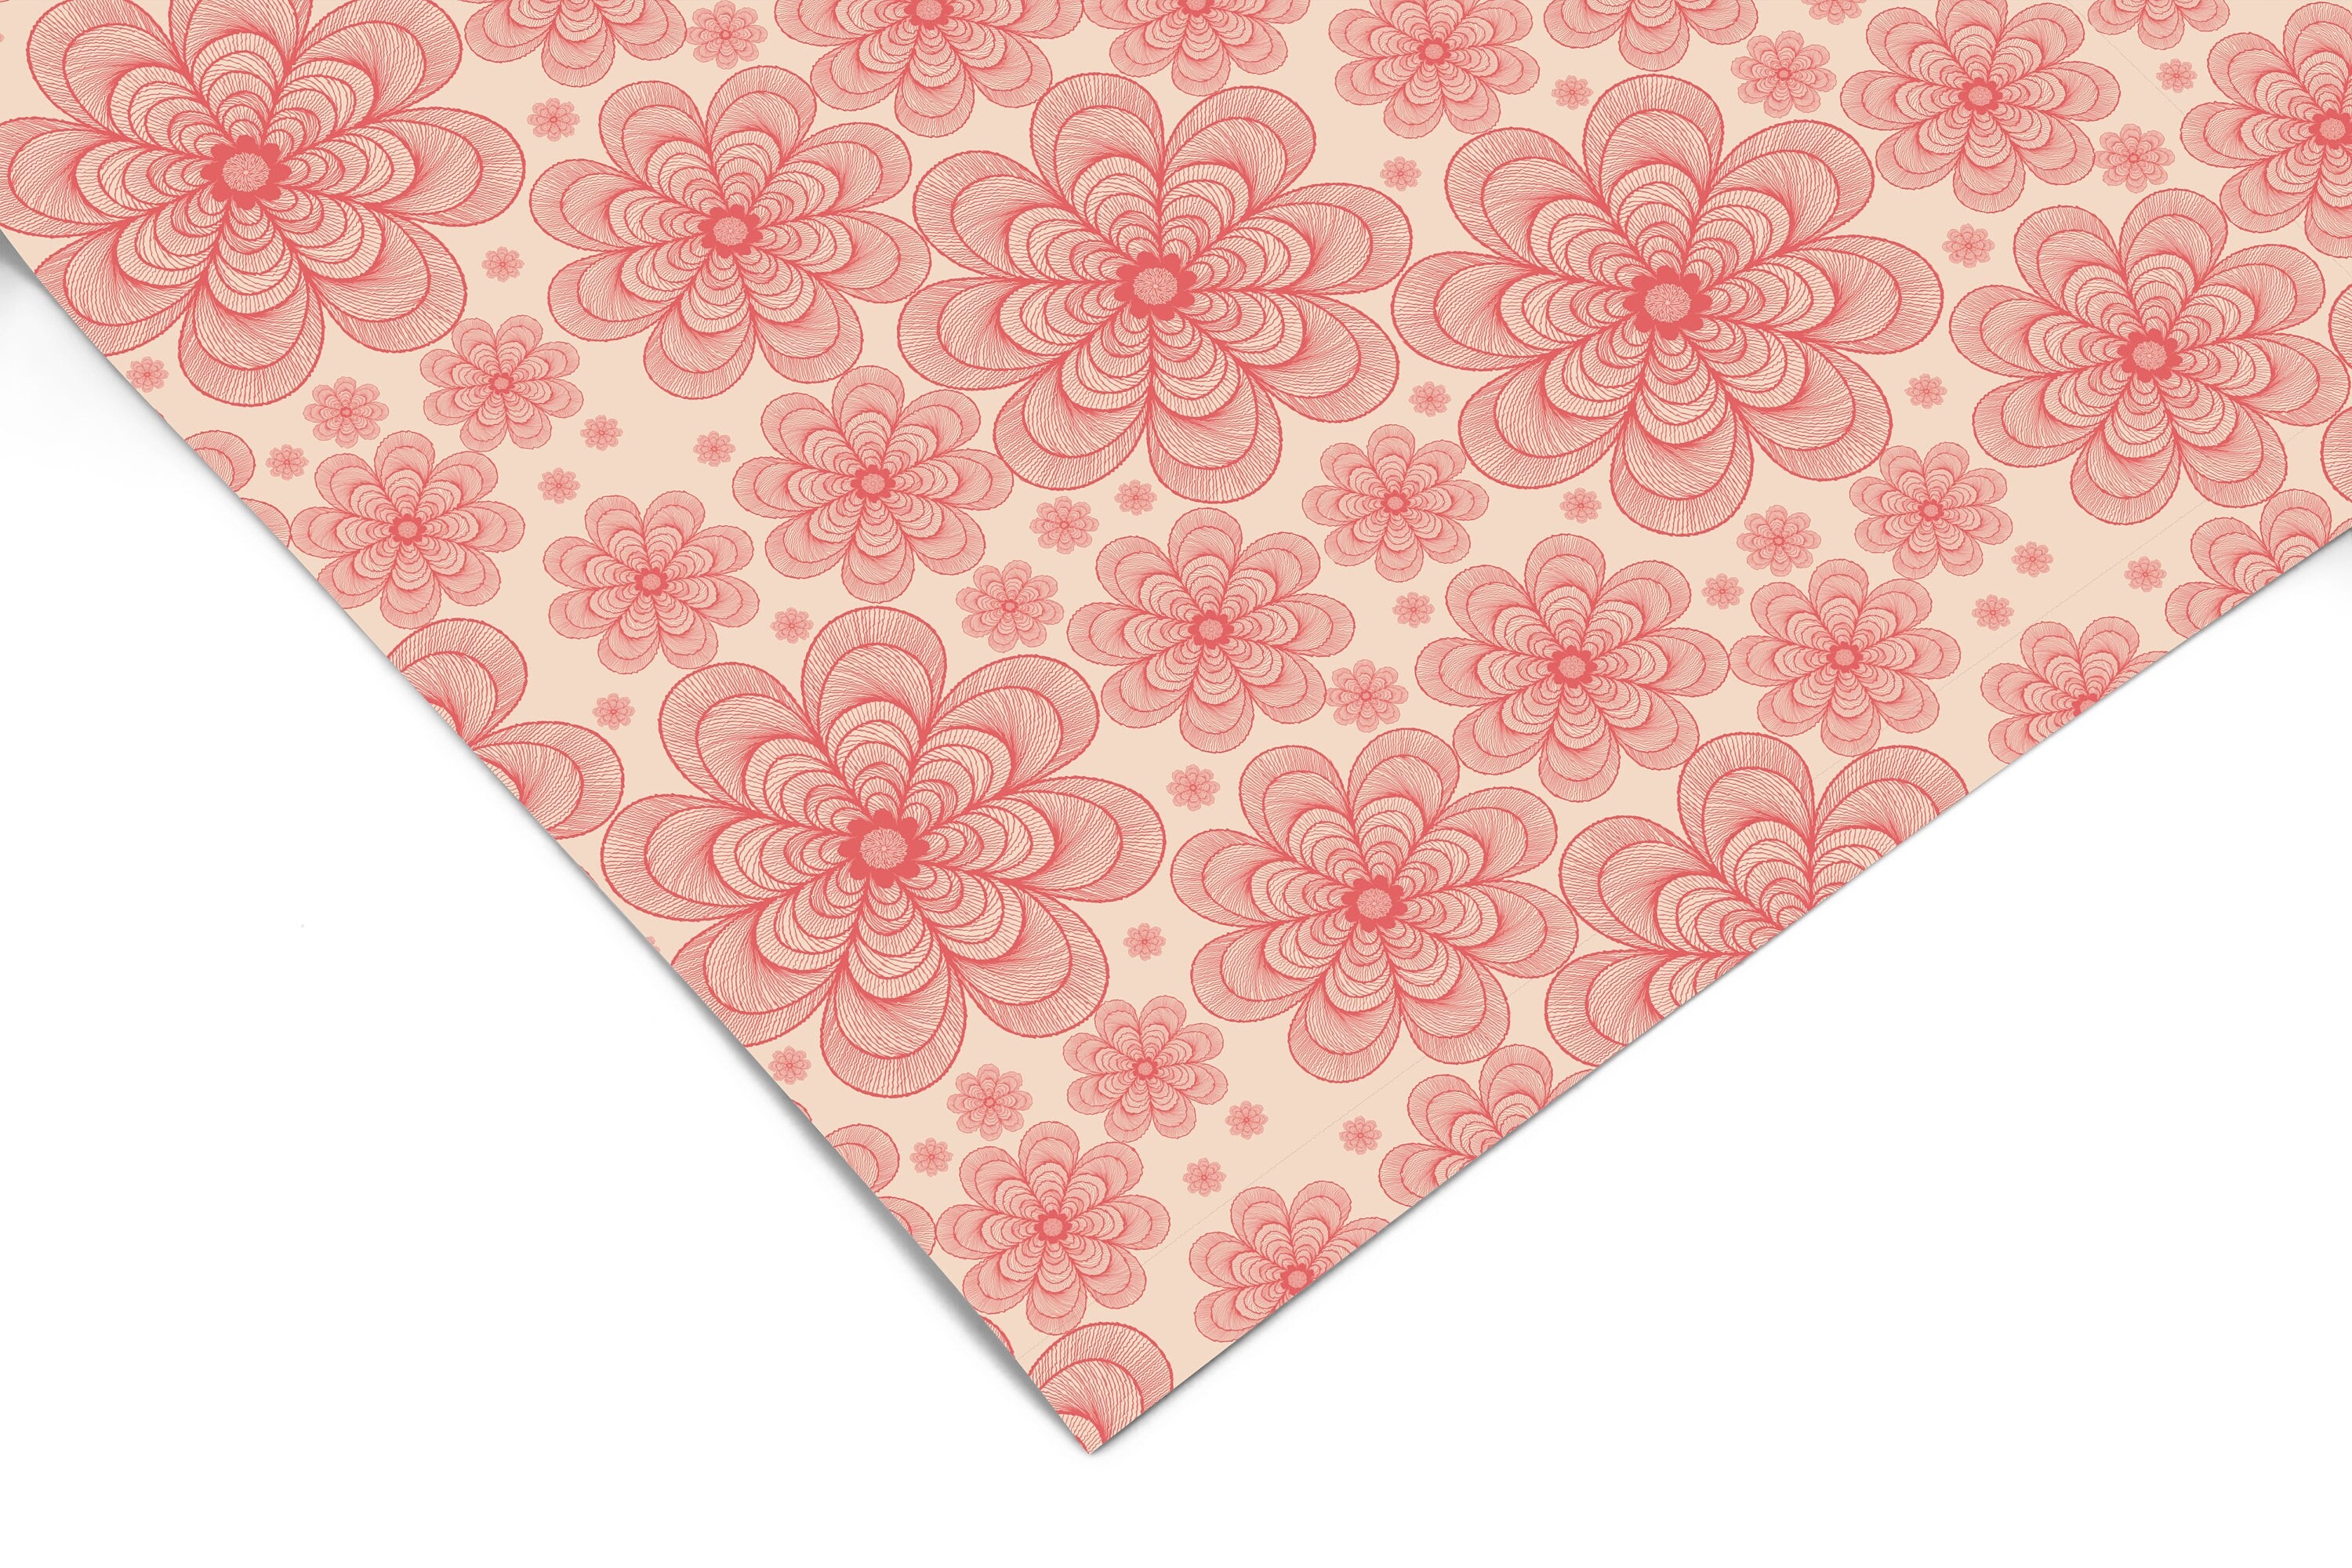 Retro Pink Flowers Contact Paper | Peel And Stick Wallpaper | Removable Wallpaper | Shelf Liner | Drawer Liner | Peel and Stick Paper 937 - JamesAndColors